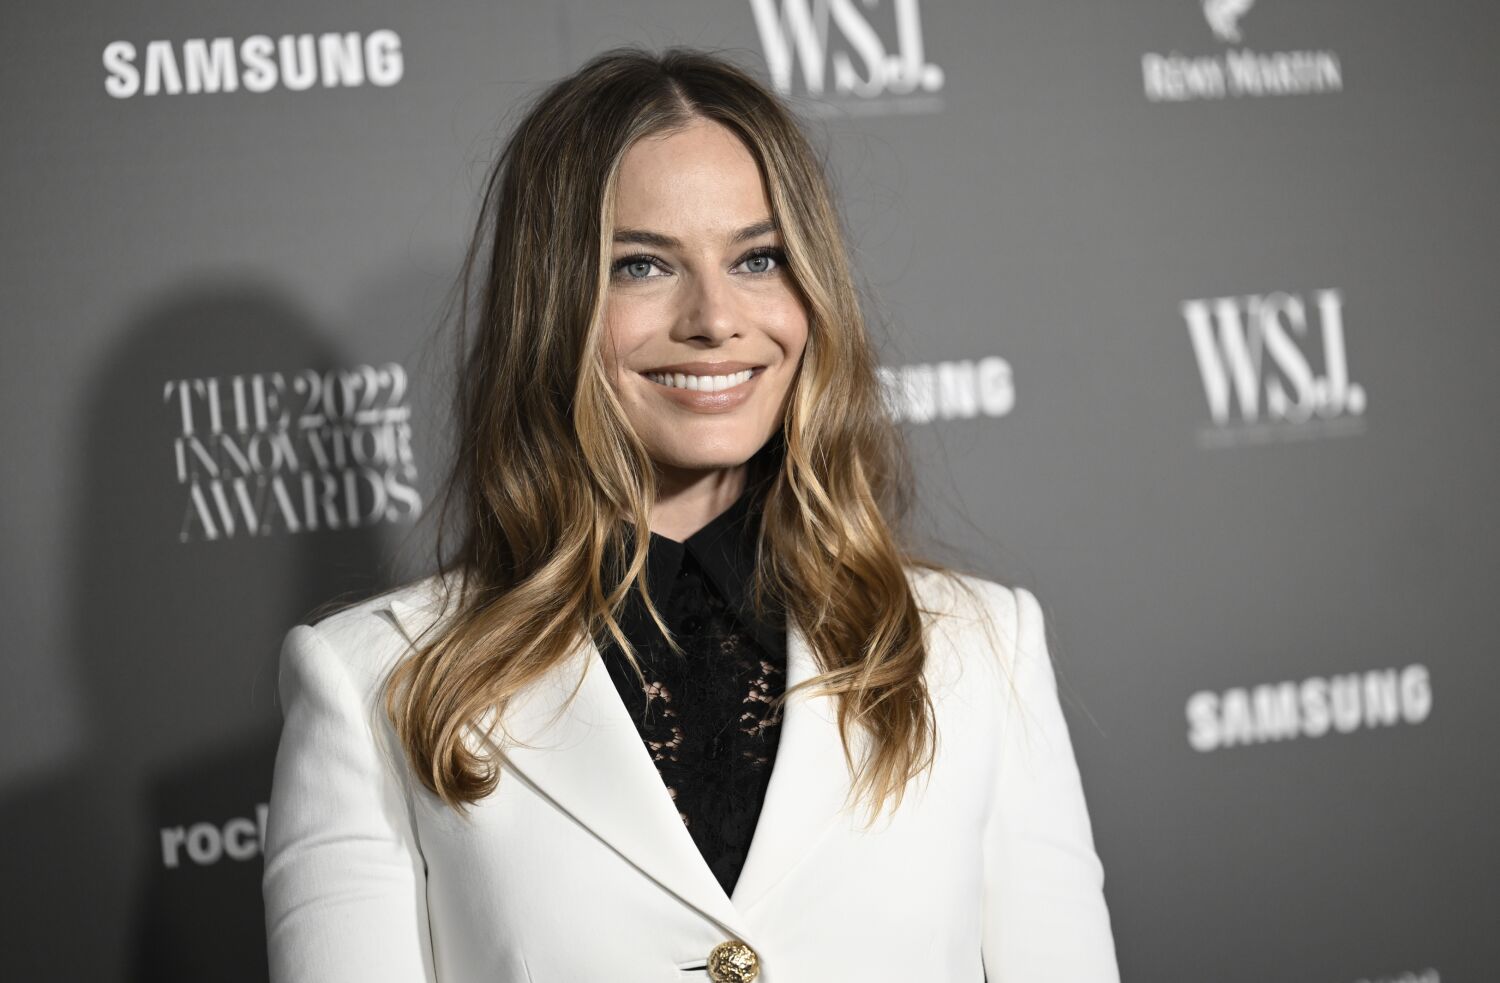 Margot Robbie calls BS on 'crying' about Cara Delevingne - Cirrkus News